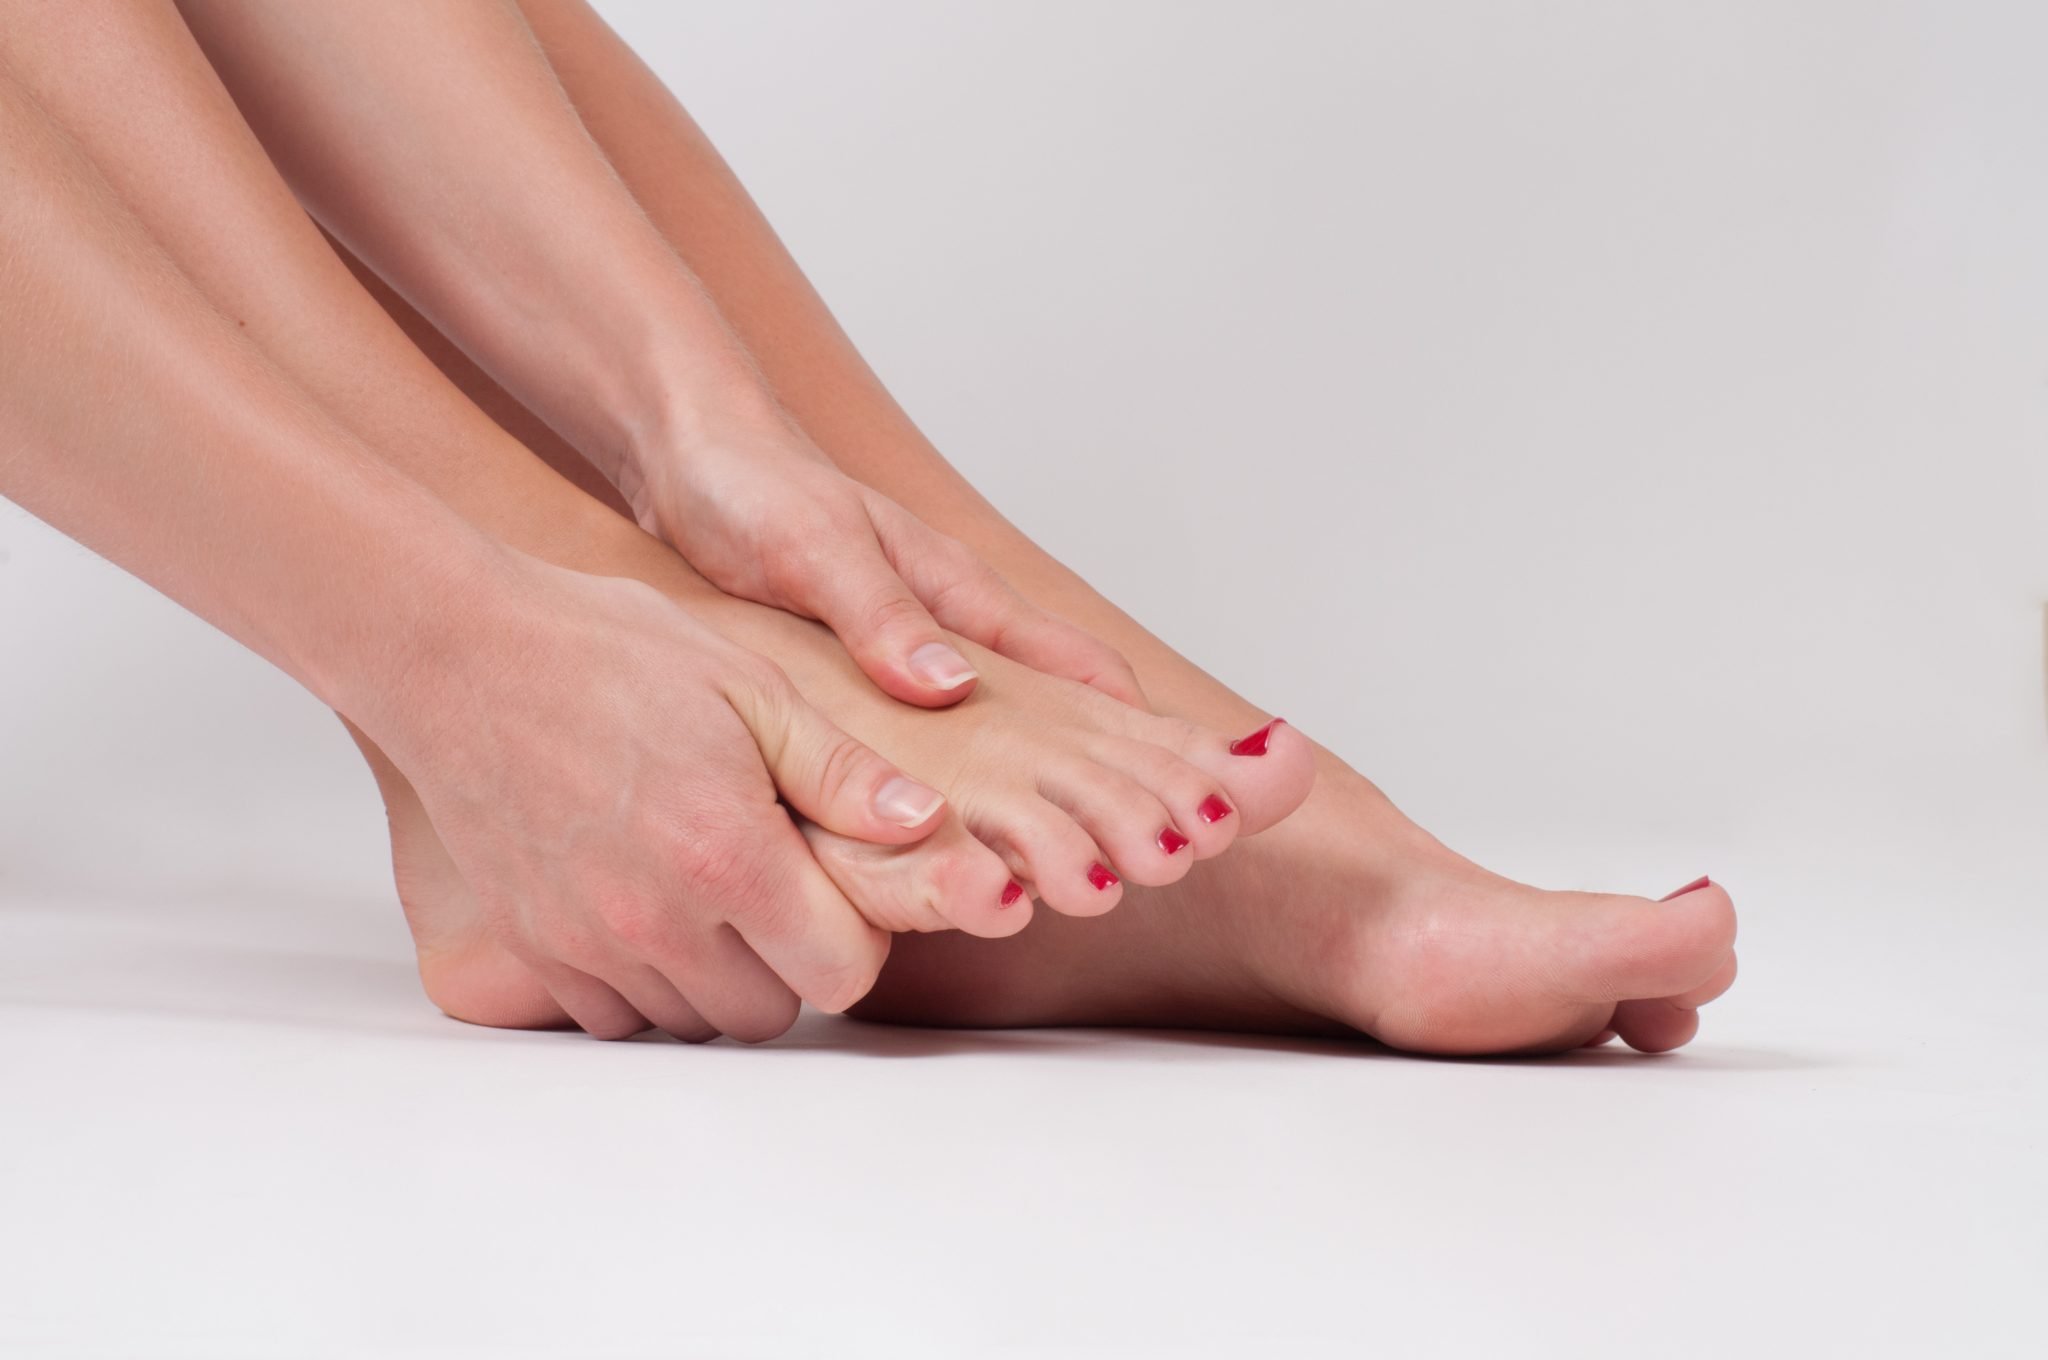 5 Reasons You May be Experiencing Foot Pain in the Morning